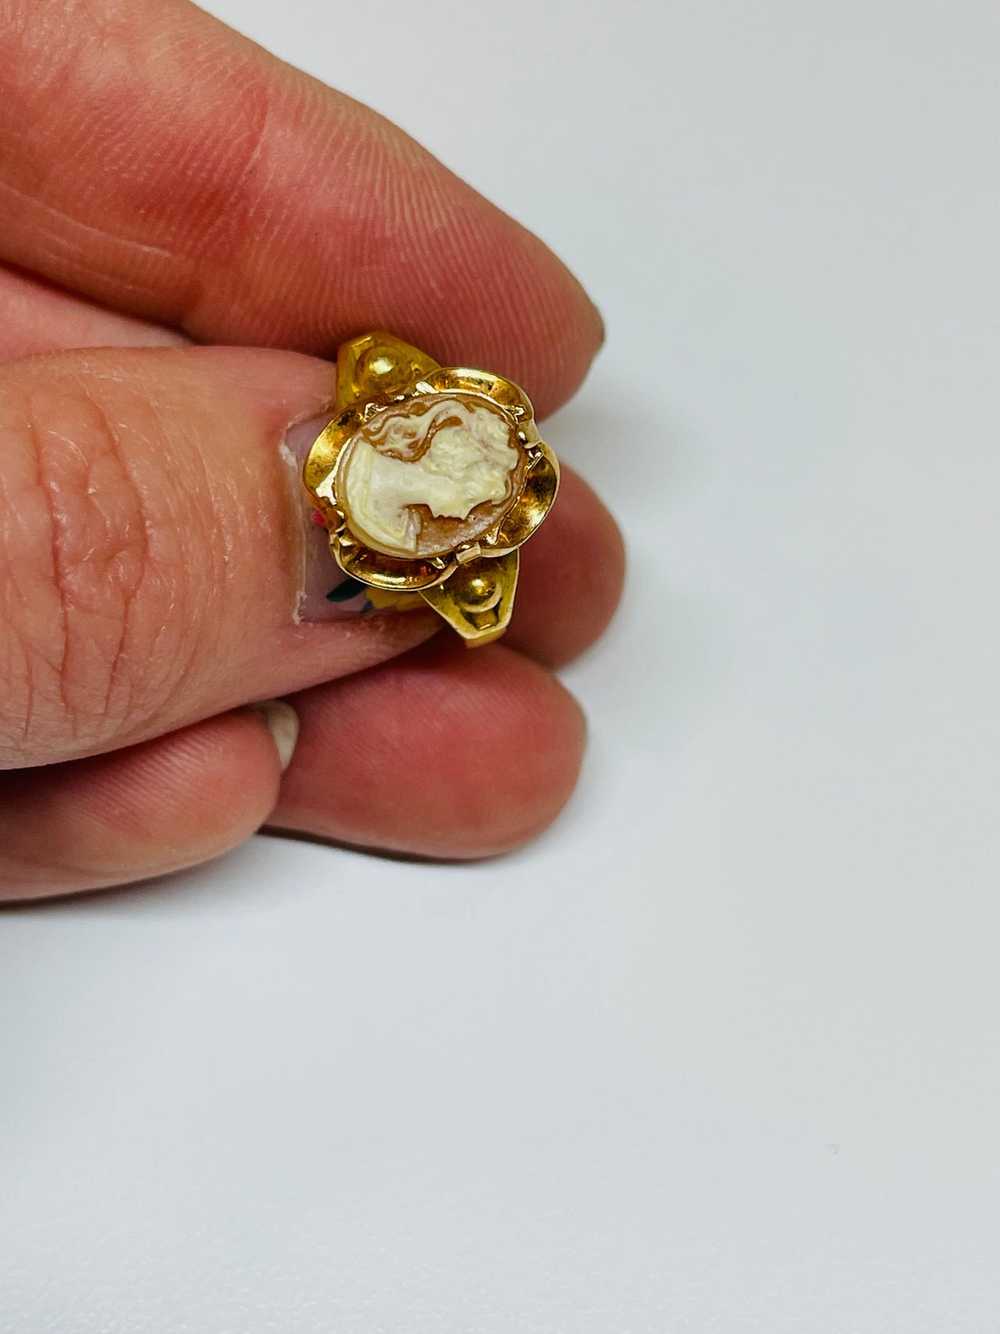 10K Gold Filled Cameo Ring - image 6